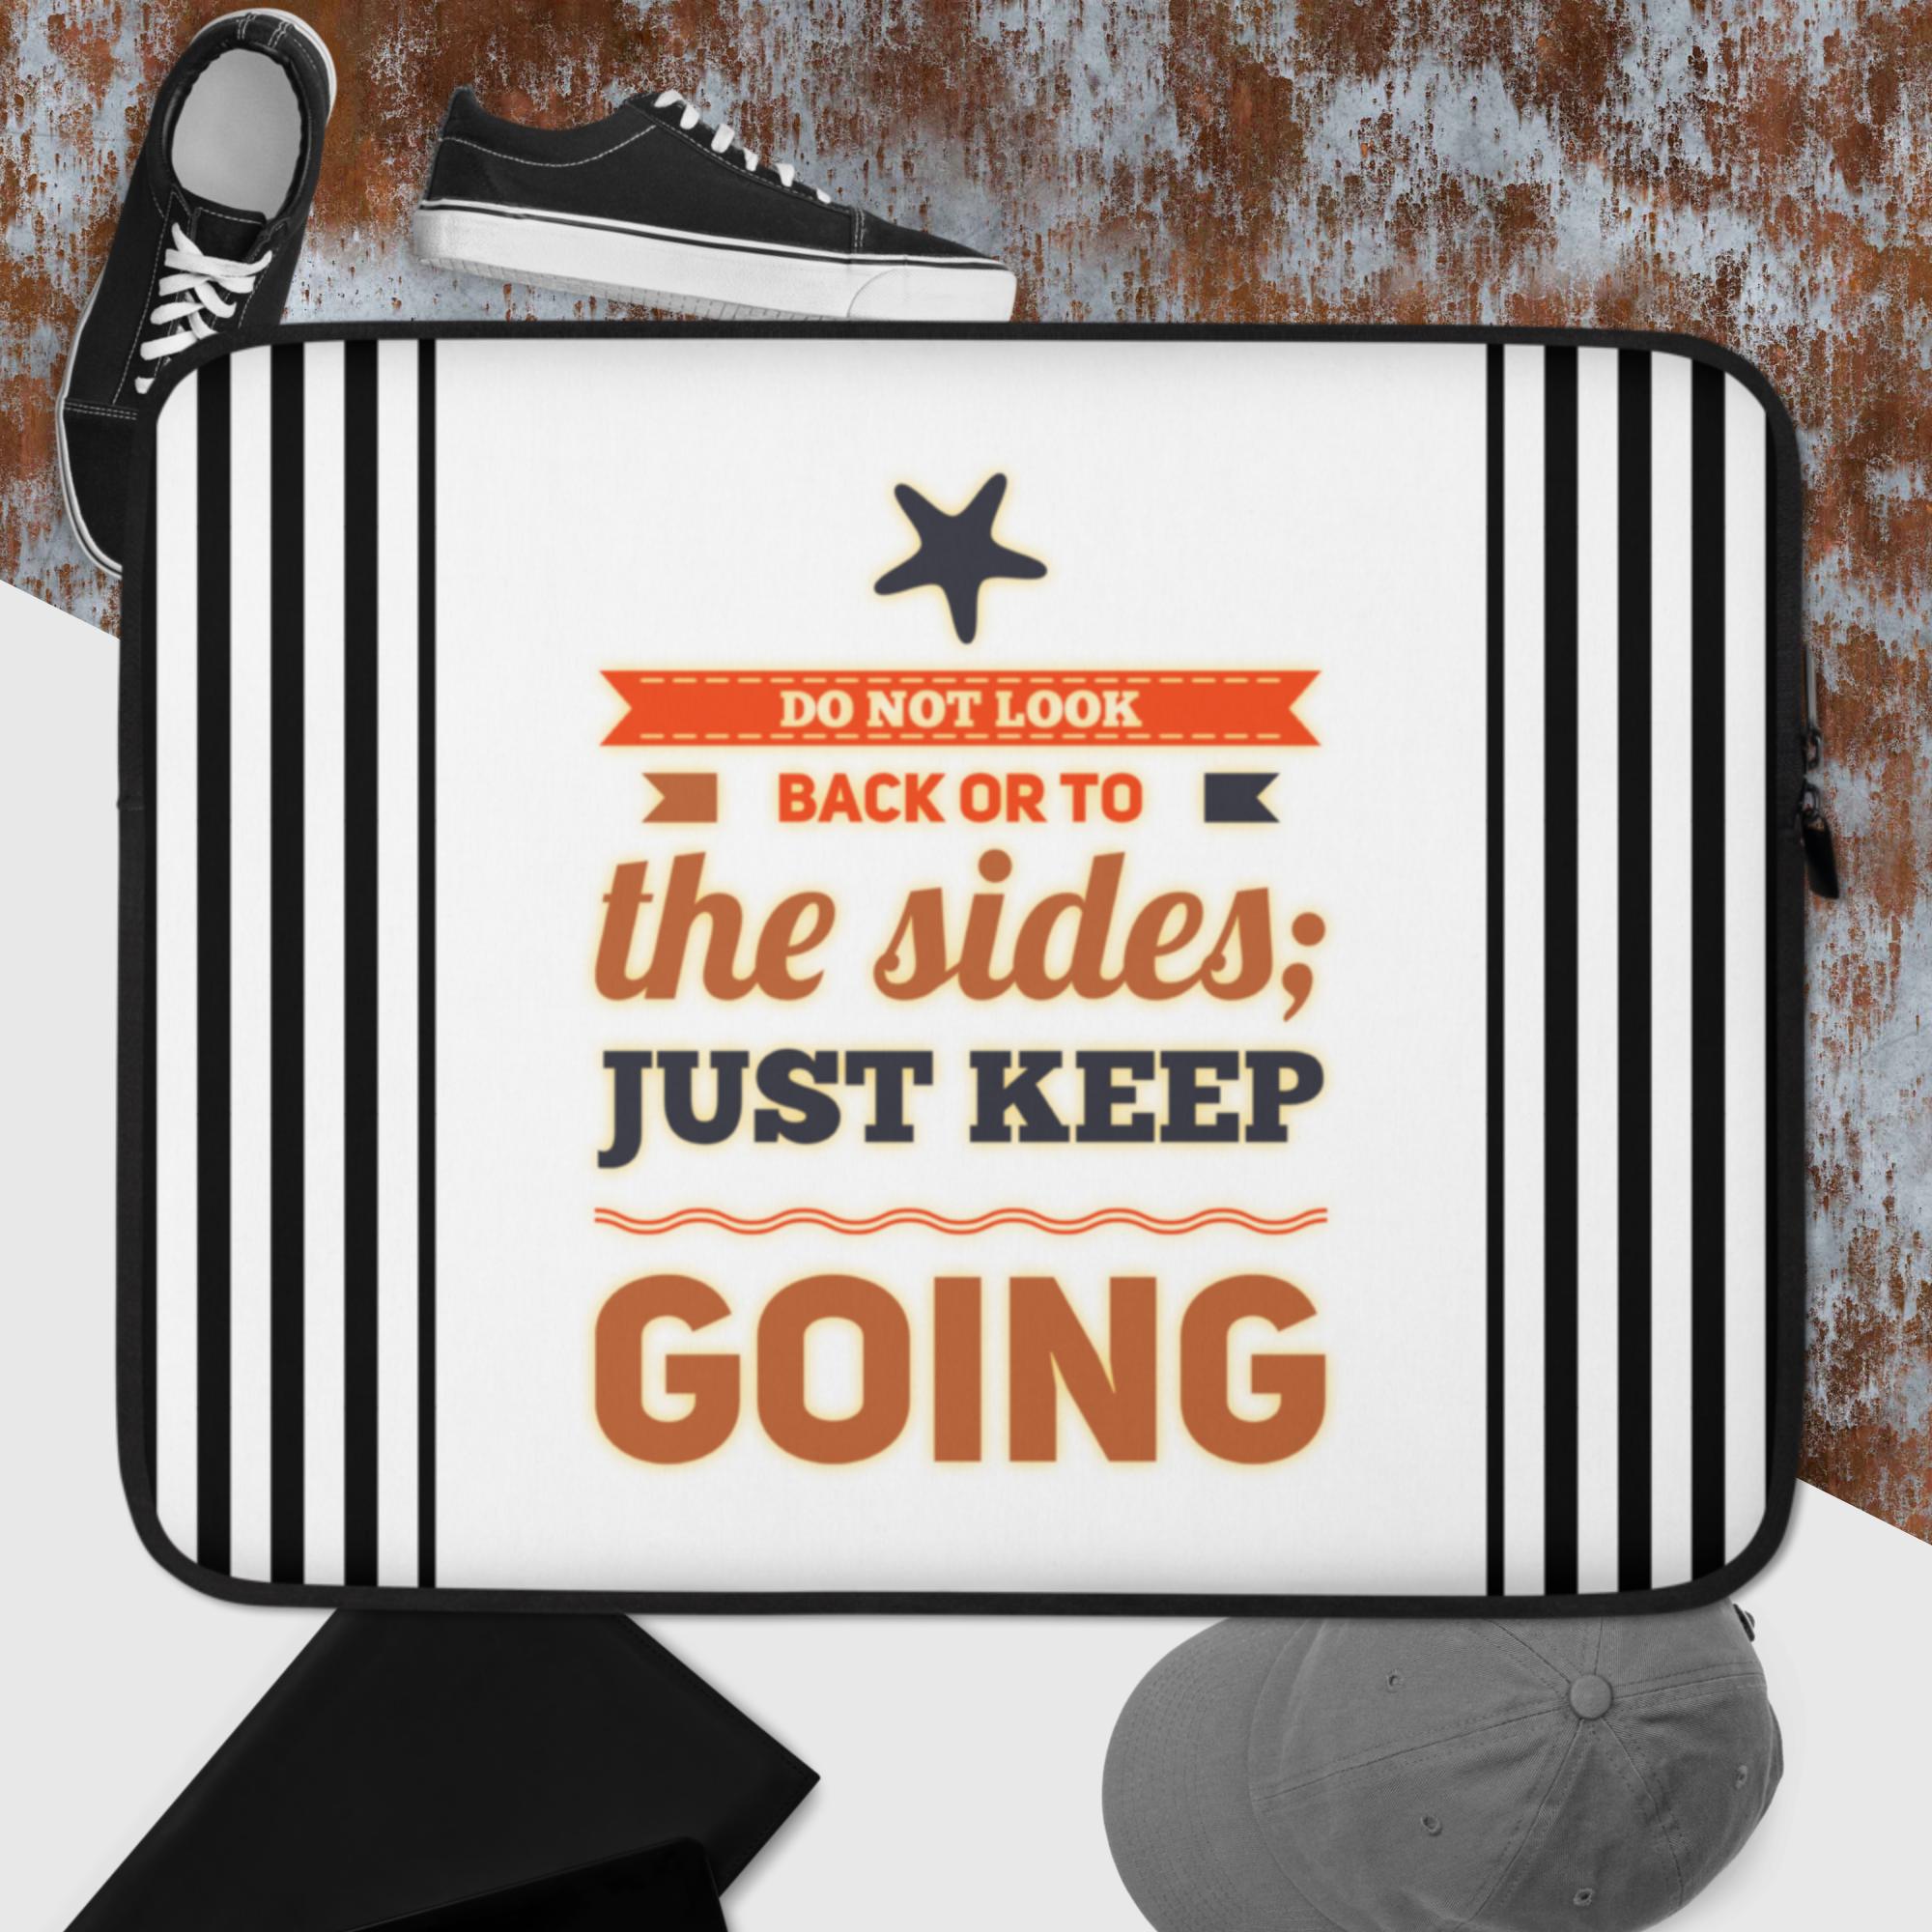 GloWell Designs - Laptop Sleeve - Motivational Quote - Just Keep Going - GloWell Designs